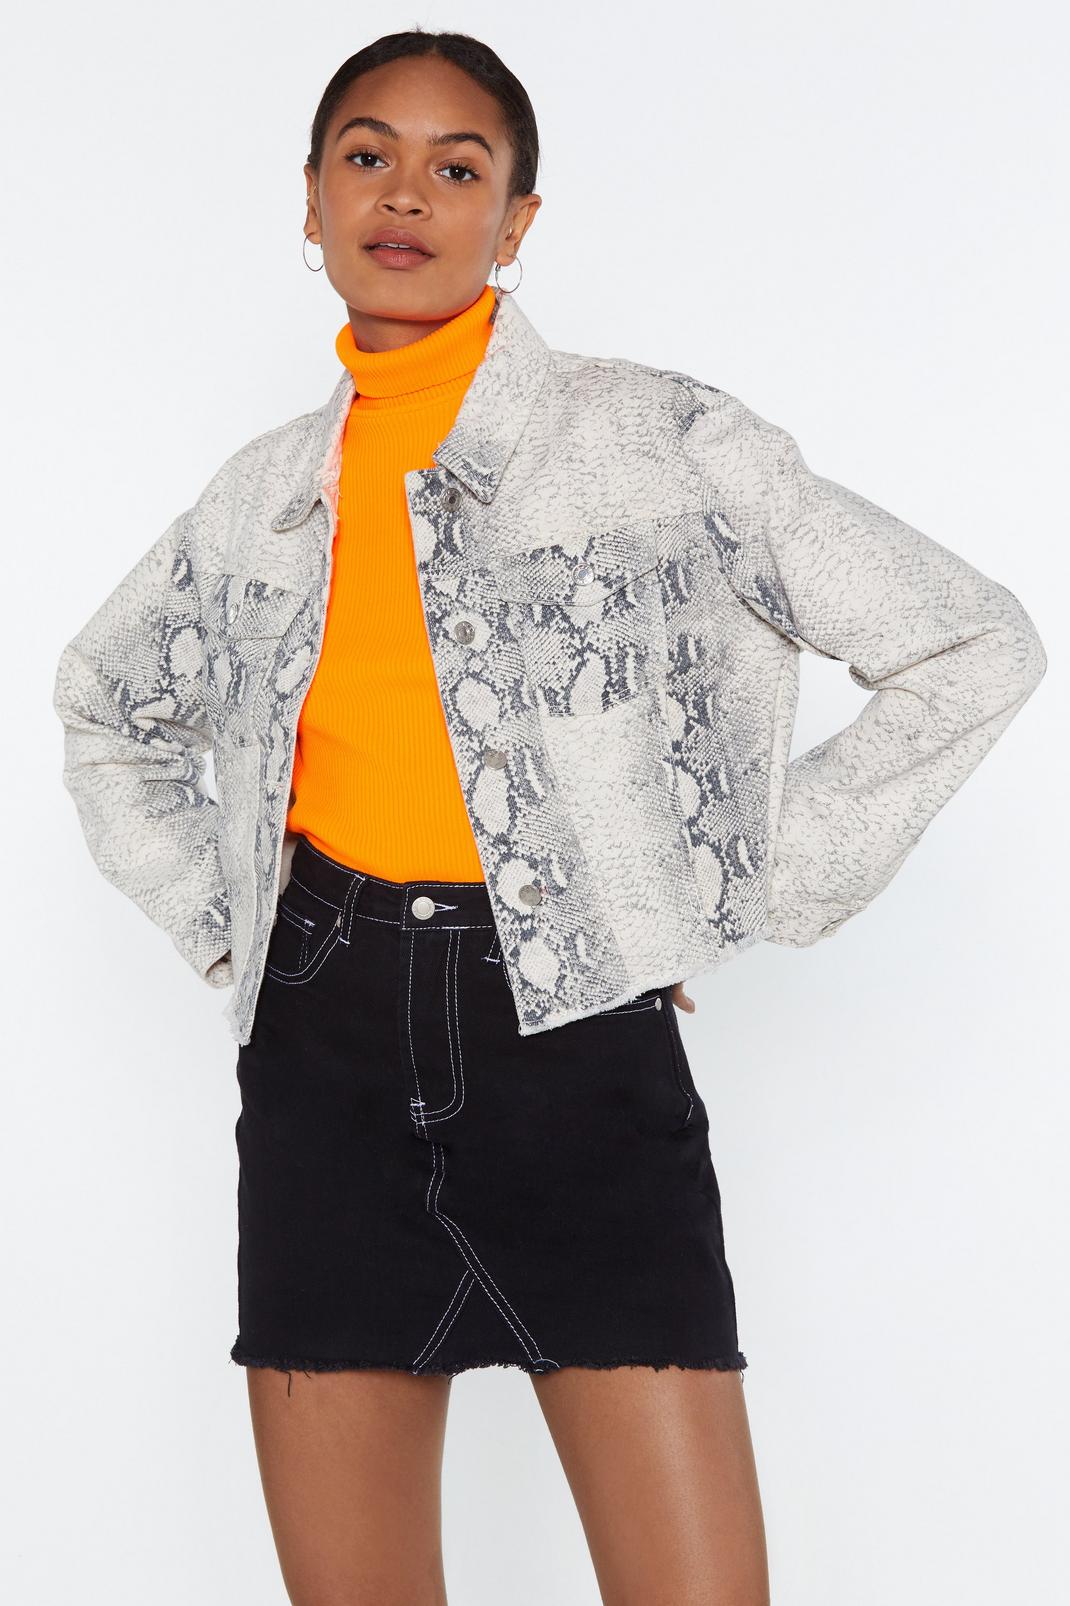 Are You Ready For Hiss Snake Denim Jacket | Nasty Gal